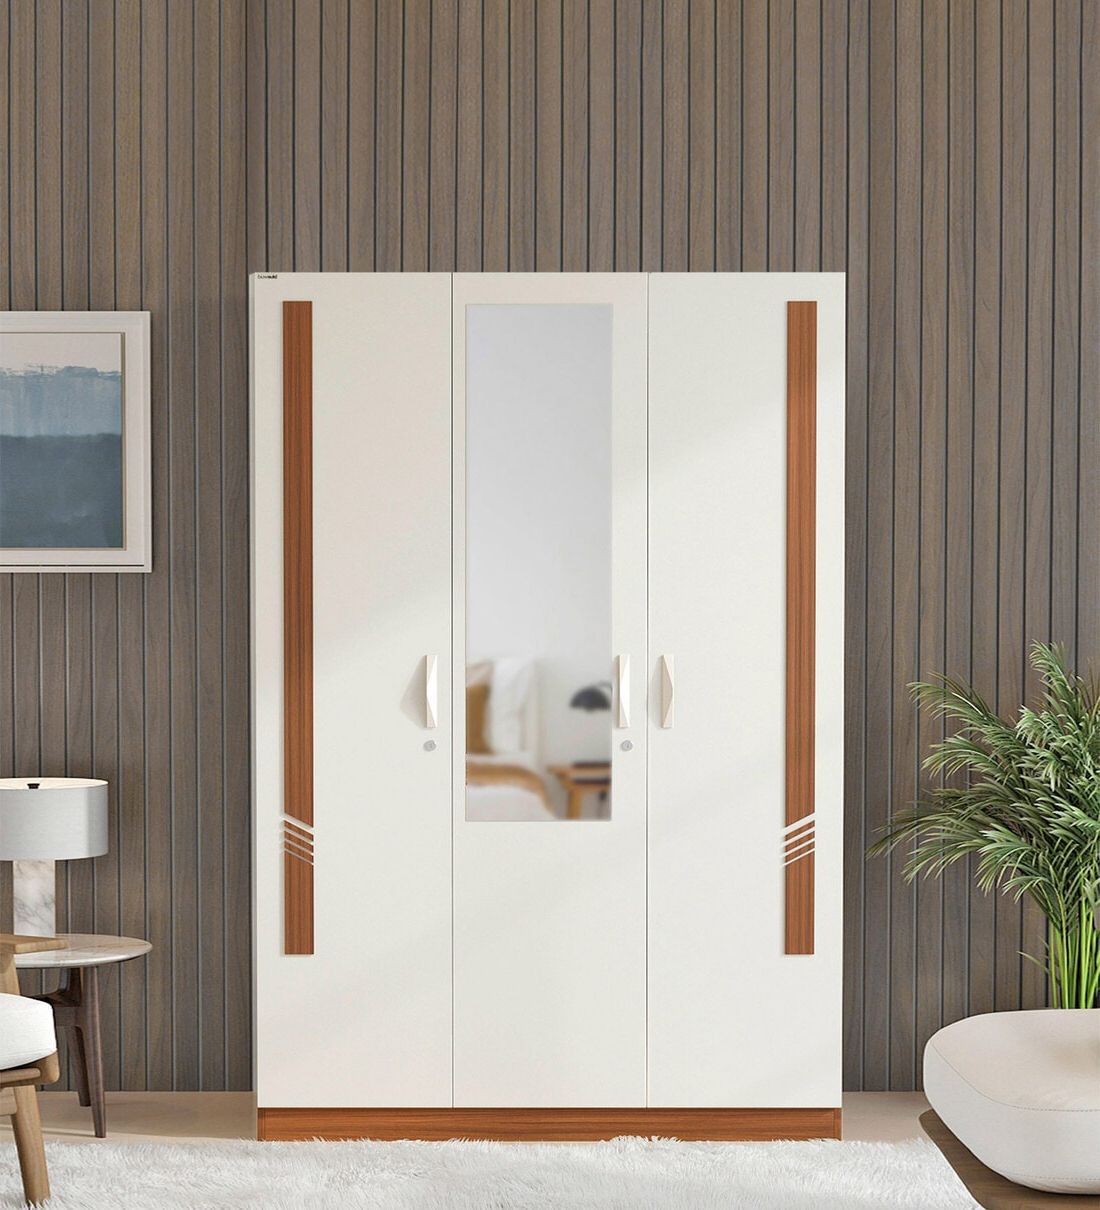 Buy Andrie 3 Door Wardrobe In Walnut & White Finish With Mirror At 24% Off Bluewud | Pepperfry In Single White Wardrobes With Mirror (View 6 of 20)